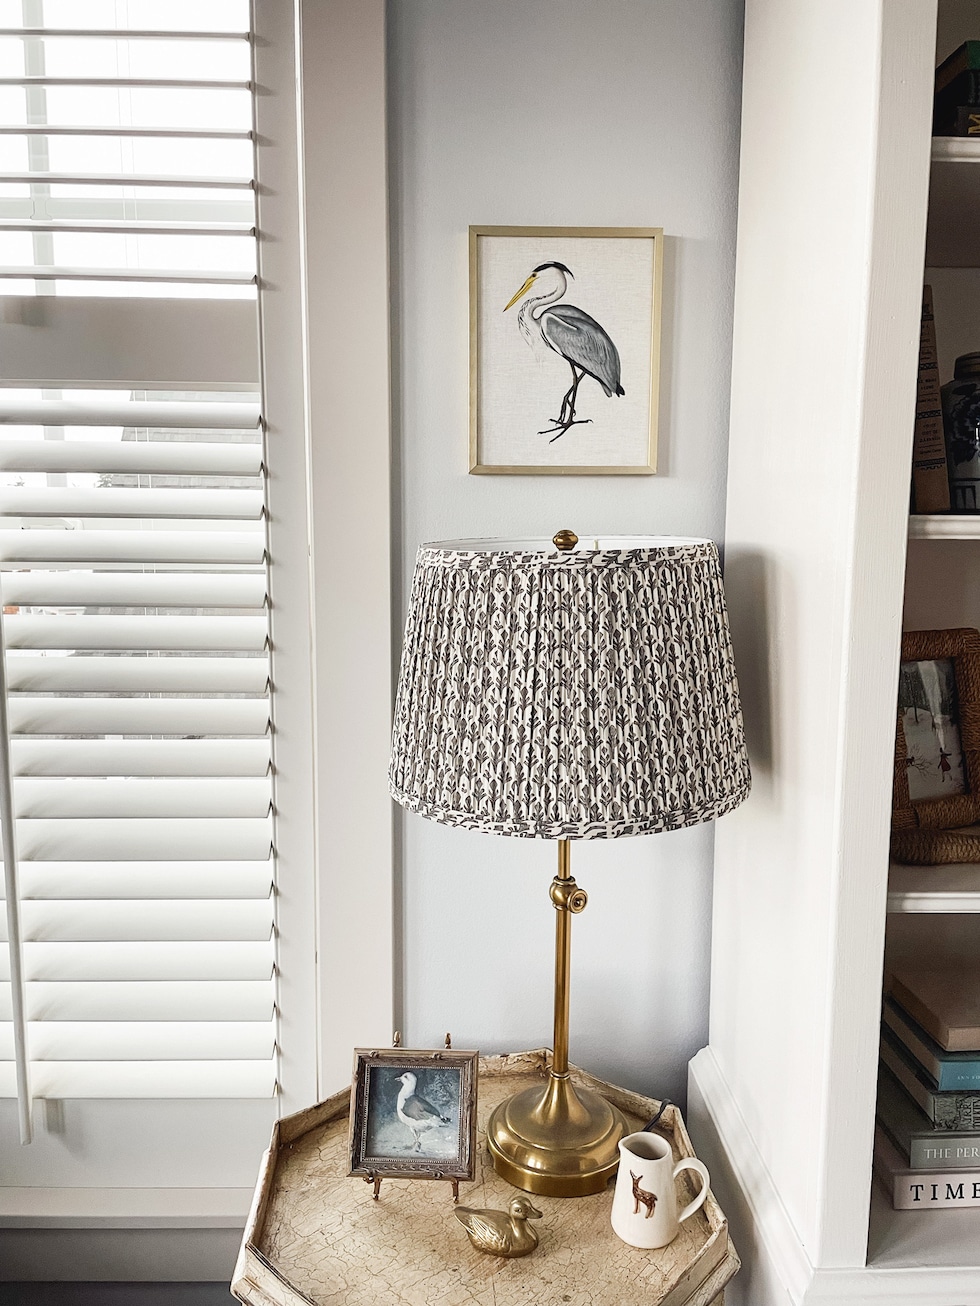 My Pleated Patterned Lampshades + Sources